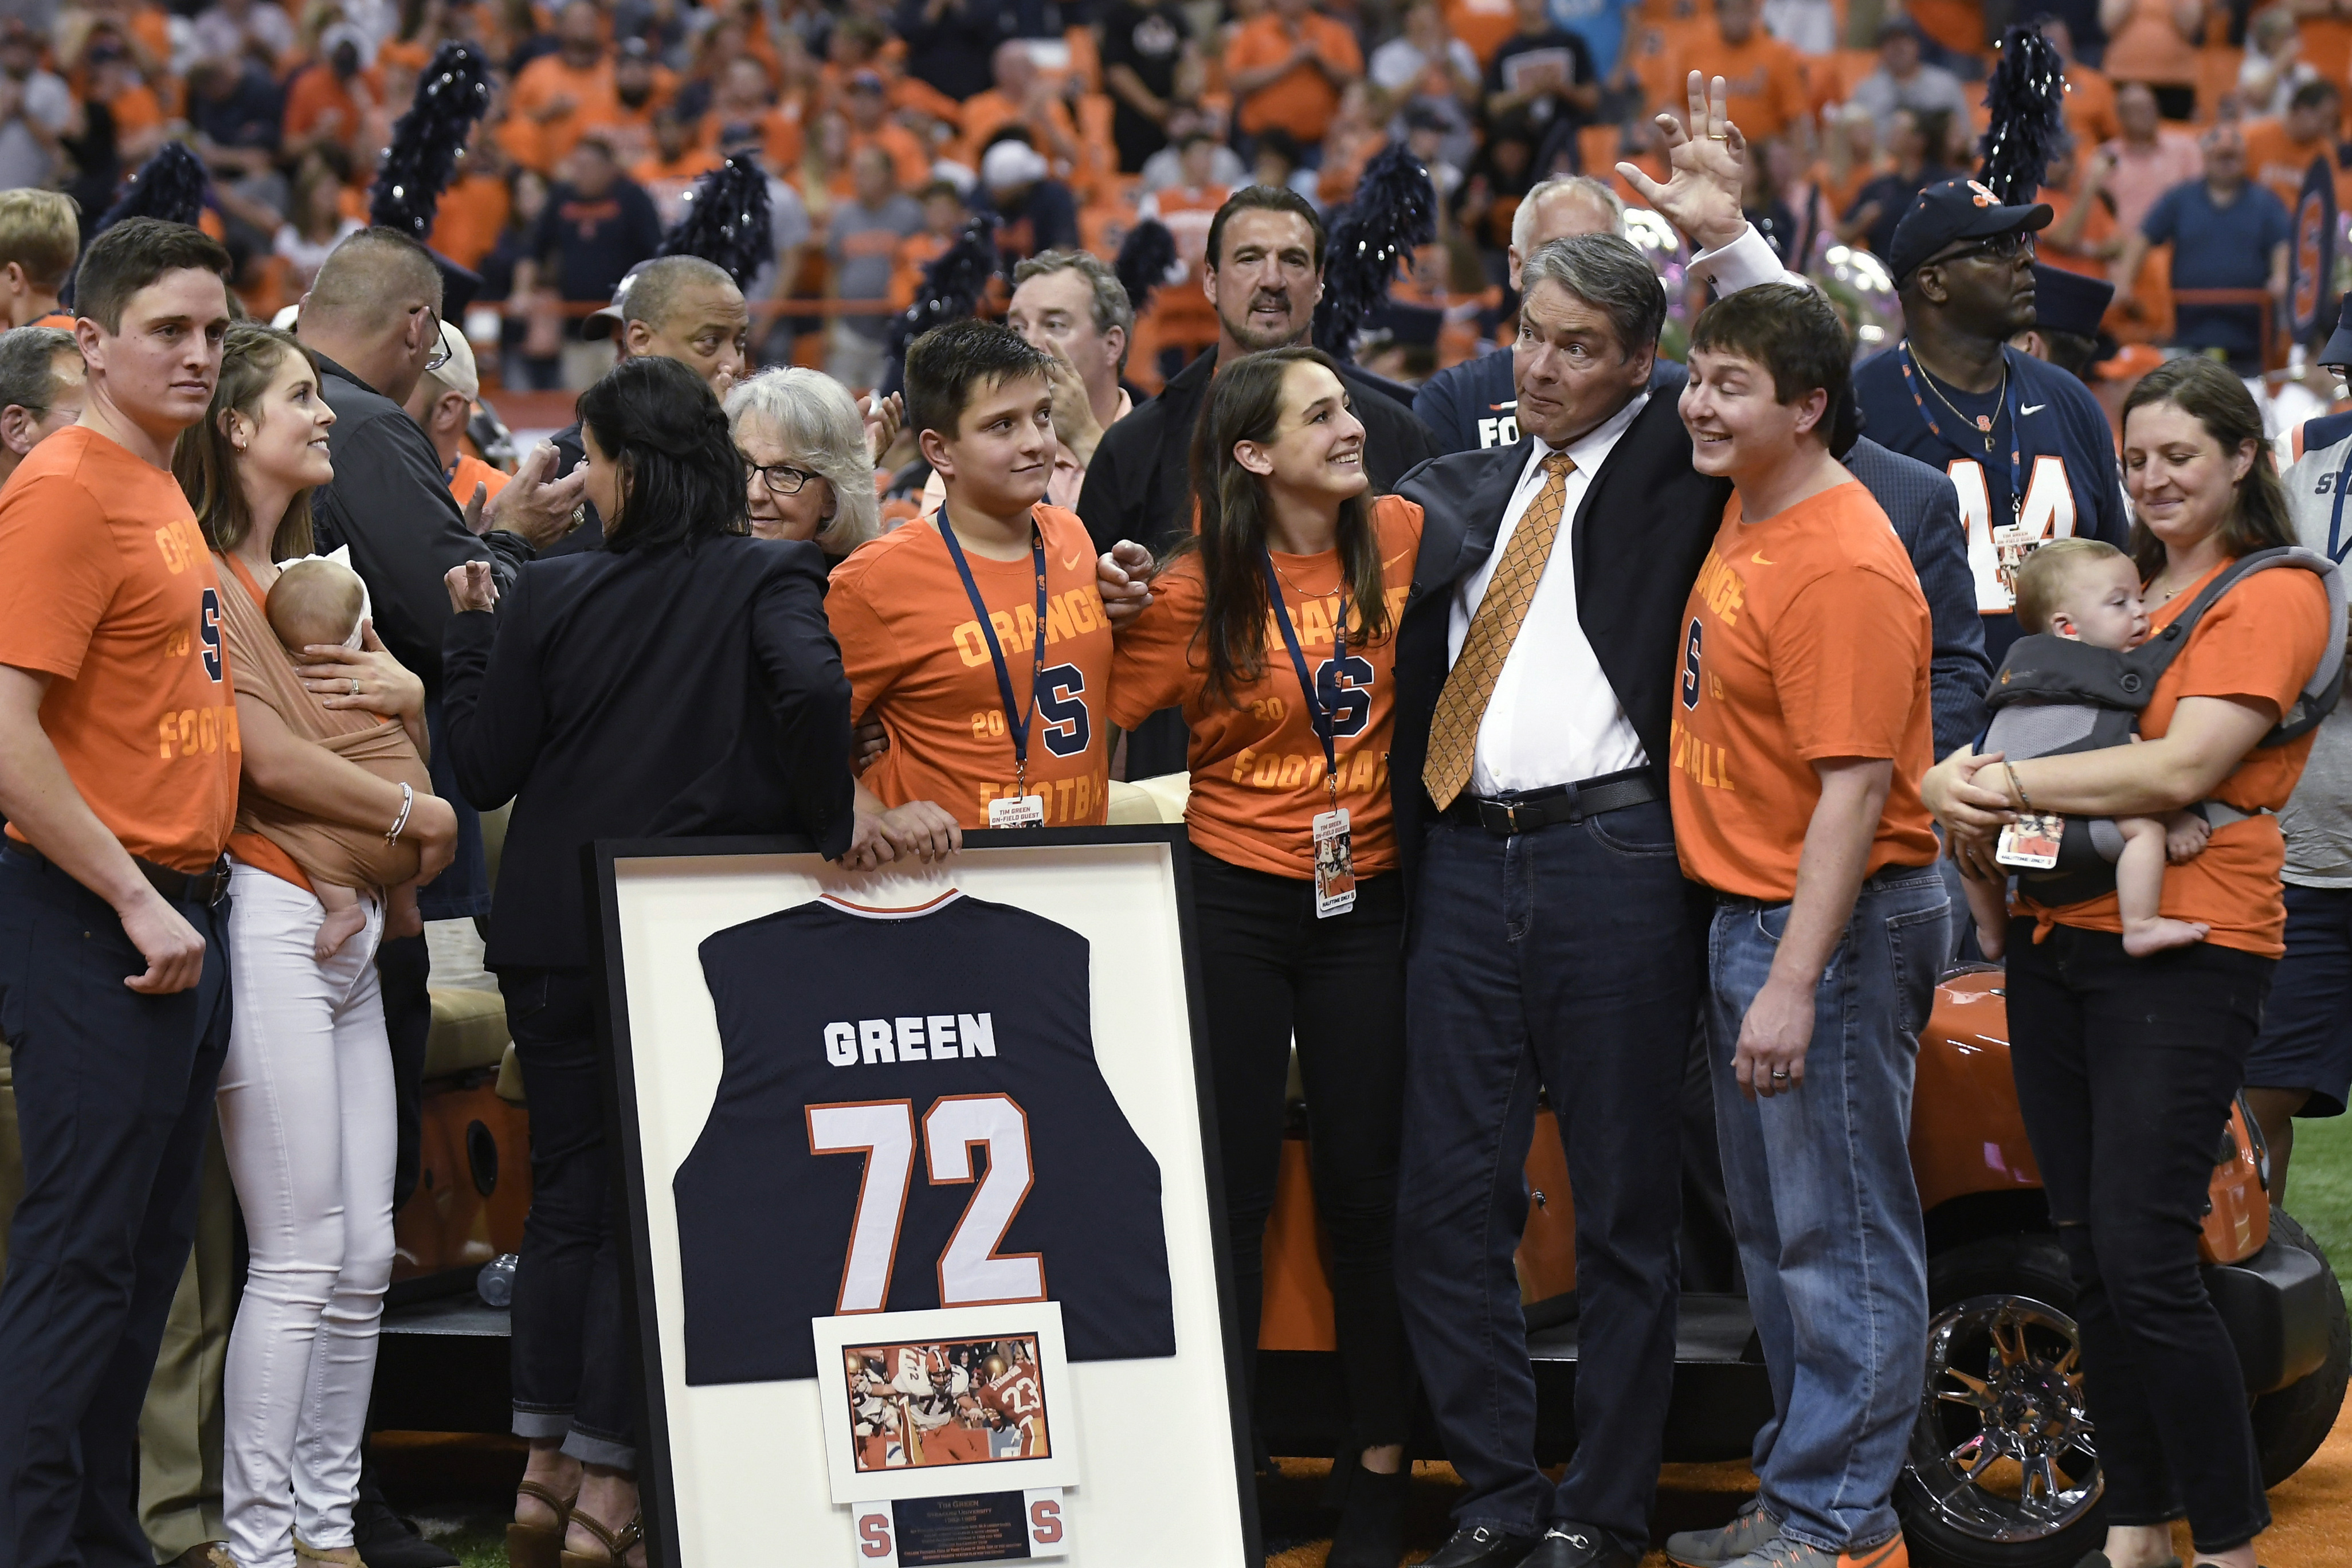 Former Syracuse star Tim Green has his No. 72 retired